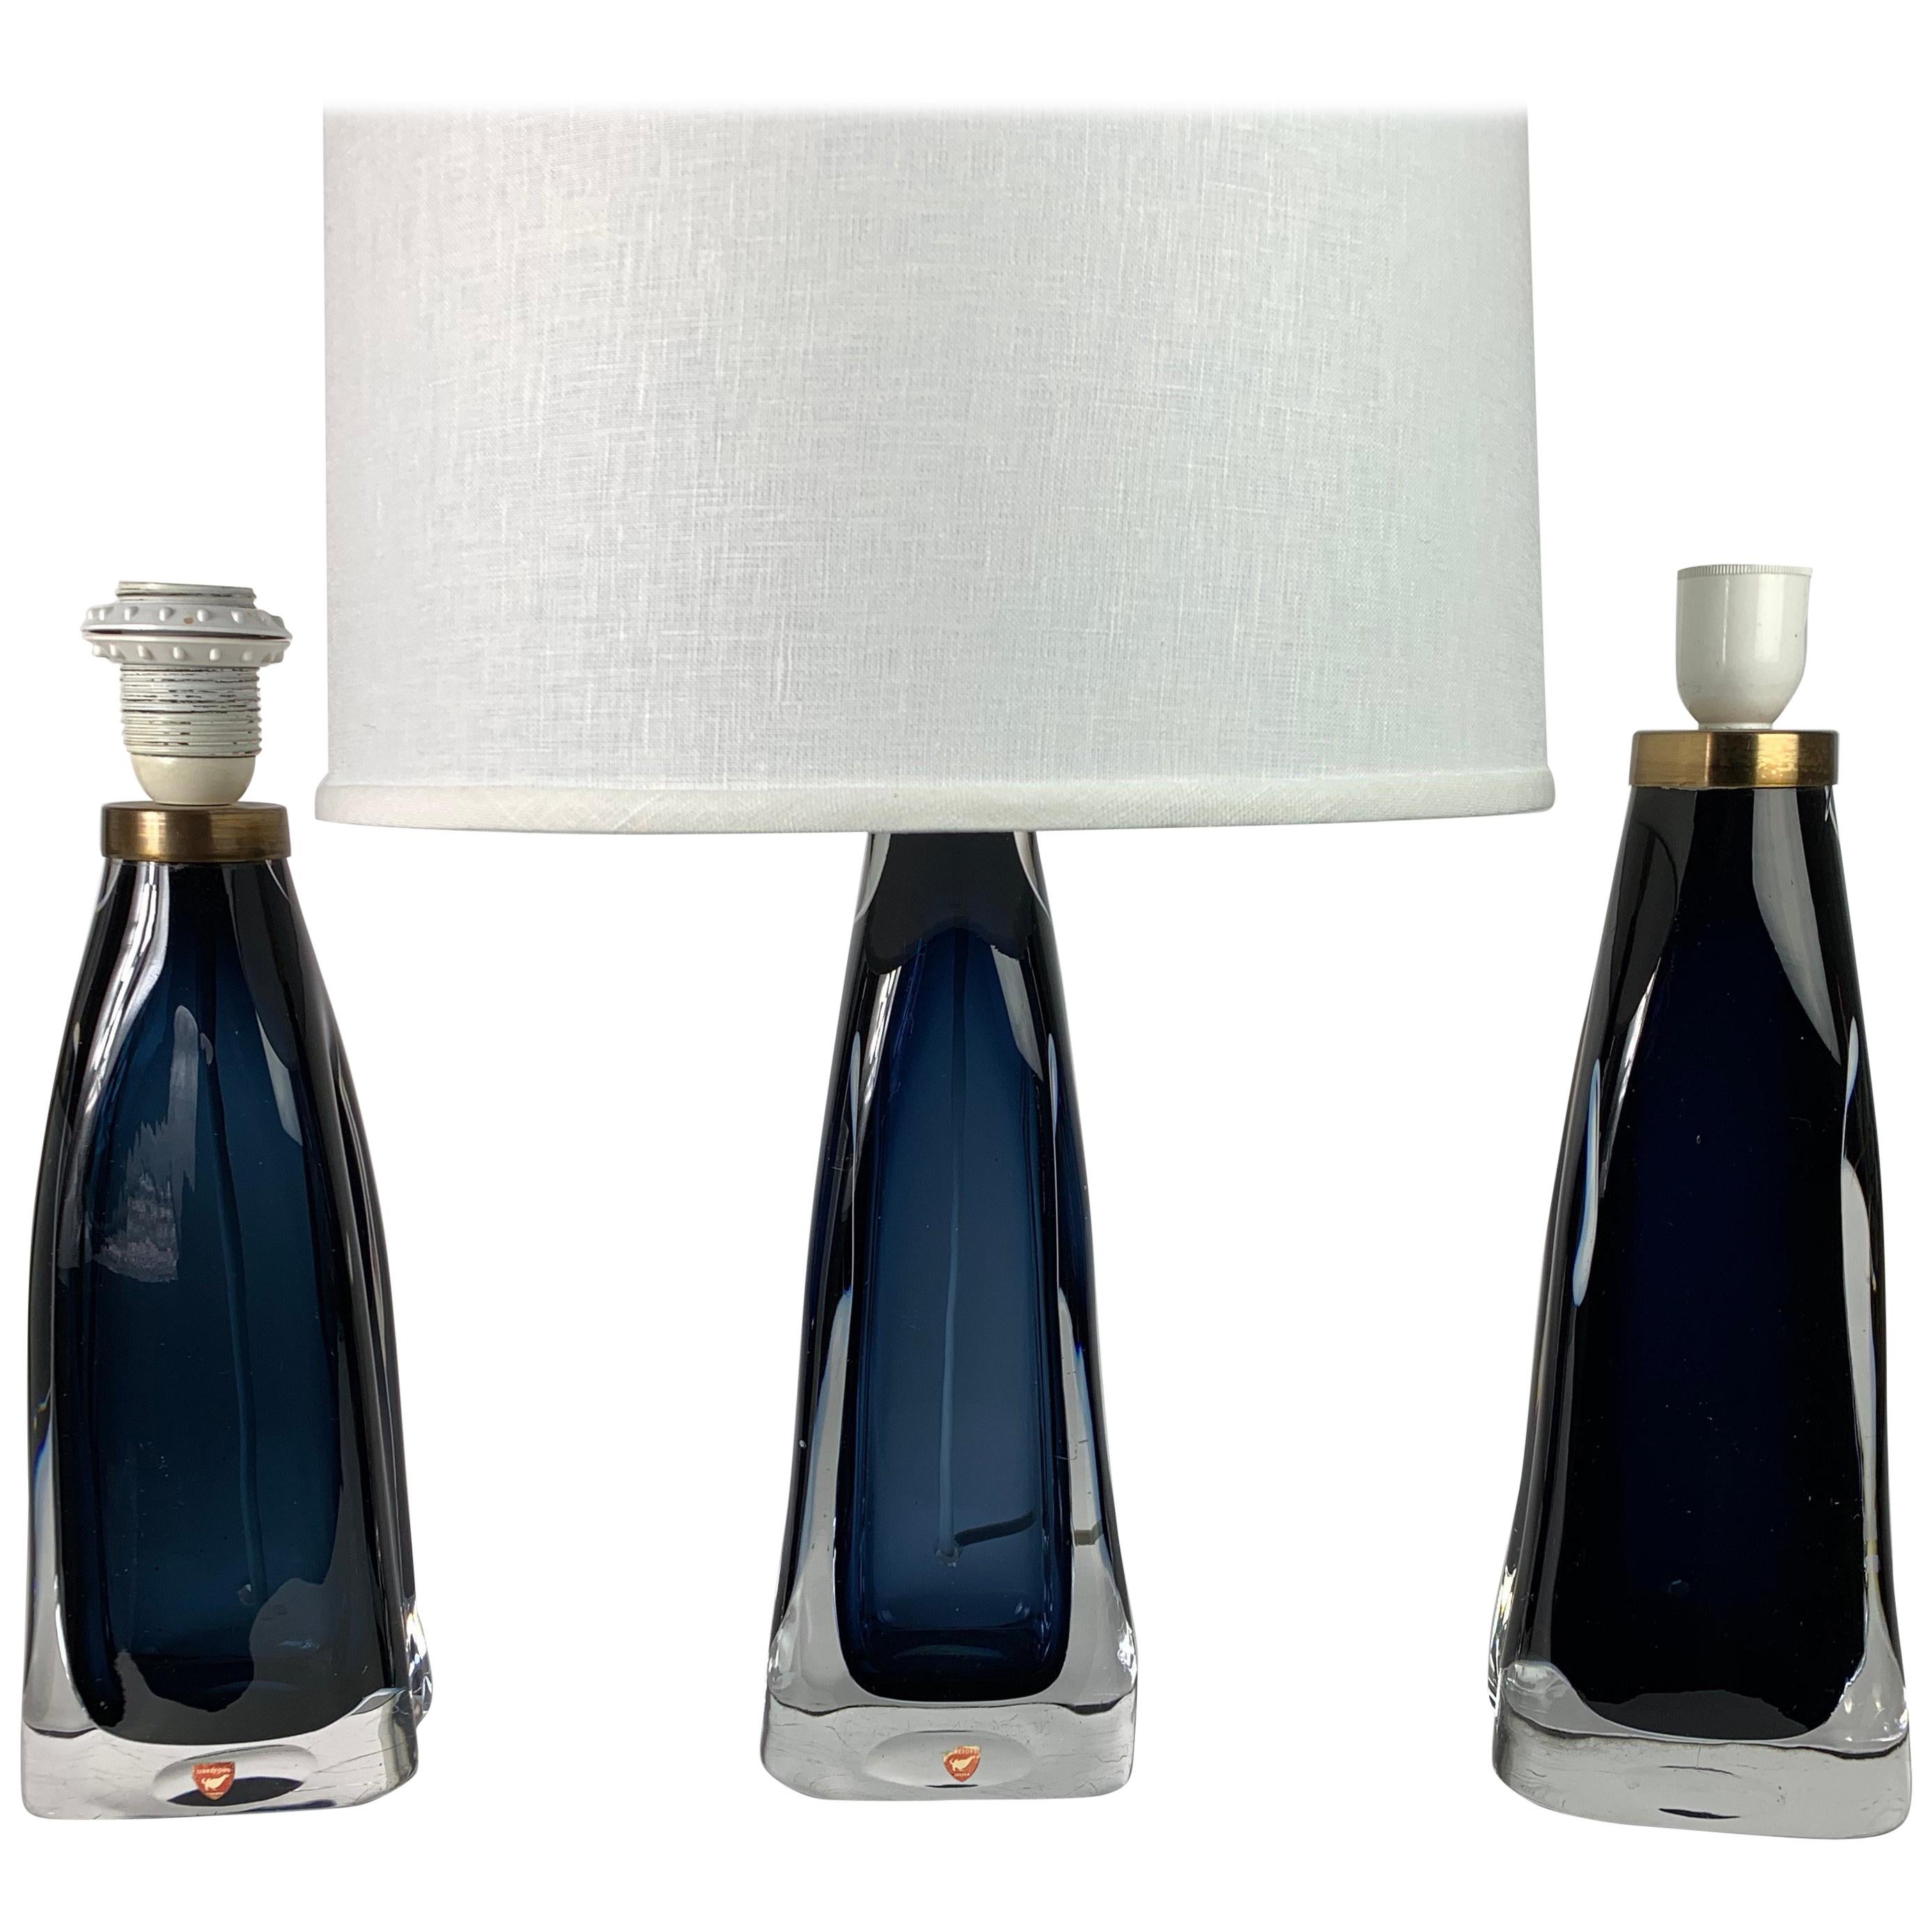 Three single lamps ranging from light blue to gray the third one is navy blue, Brass fittings by Carl Fagerlund for Orrefors, 1960, Sweden.

Shades not included.